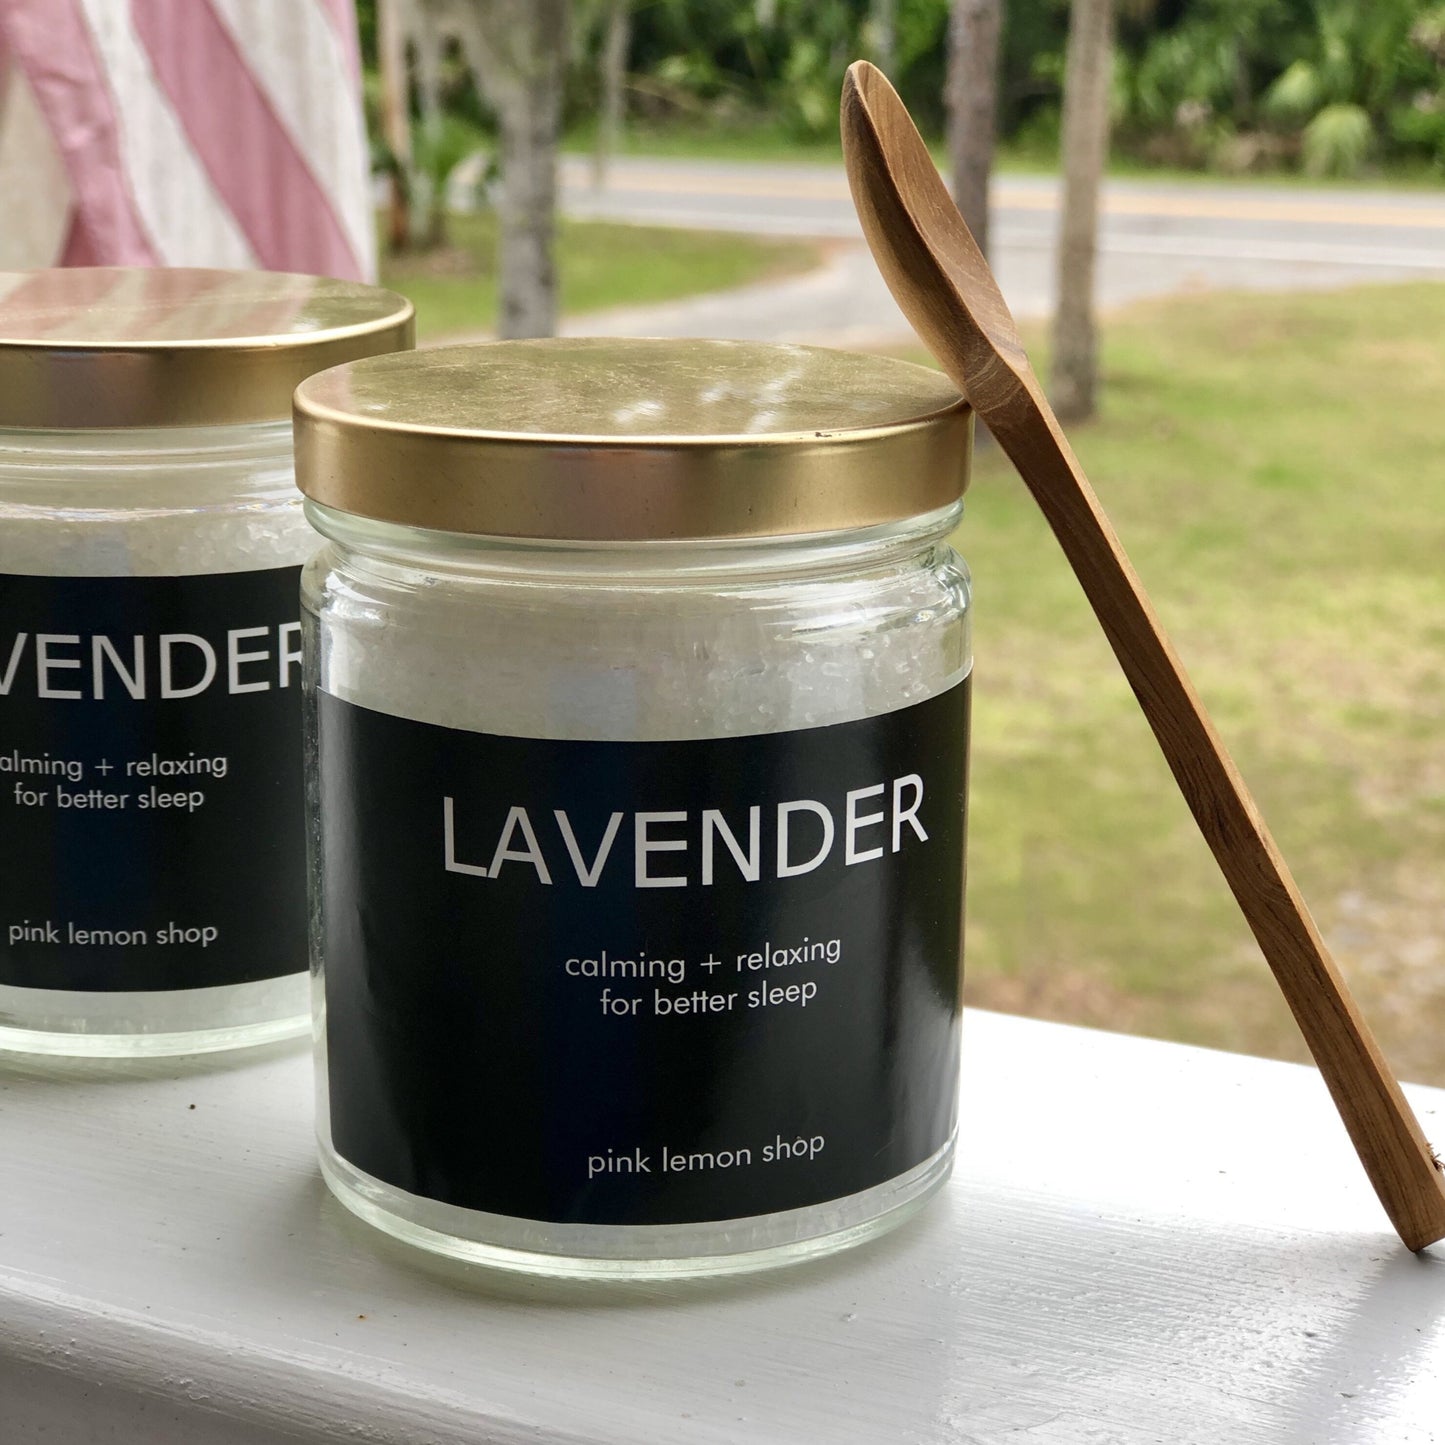 Lavender smelling bath salt in a glass jar with a wooden spoon